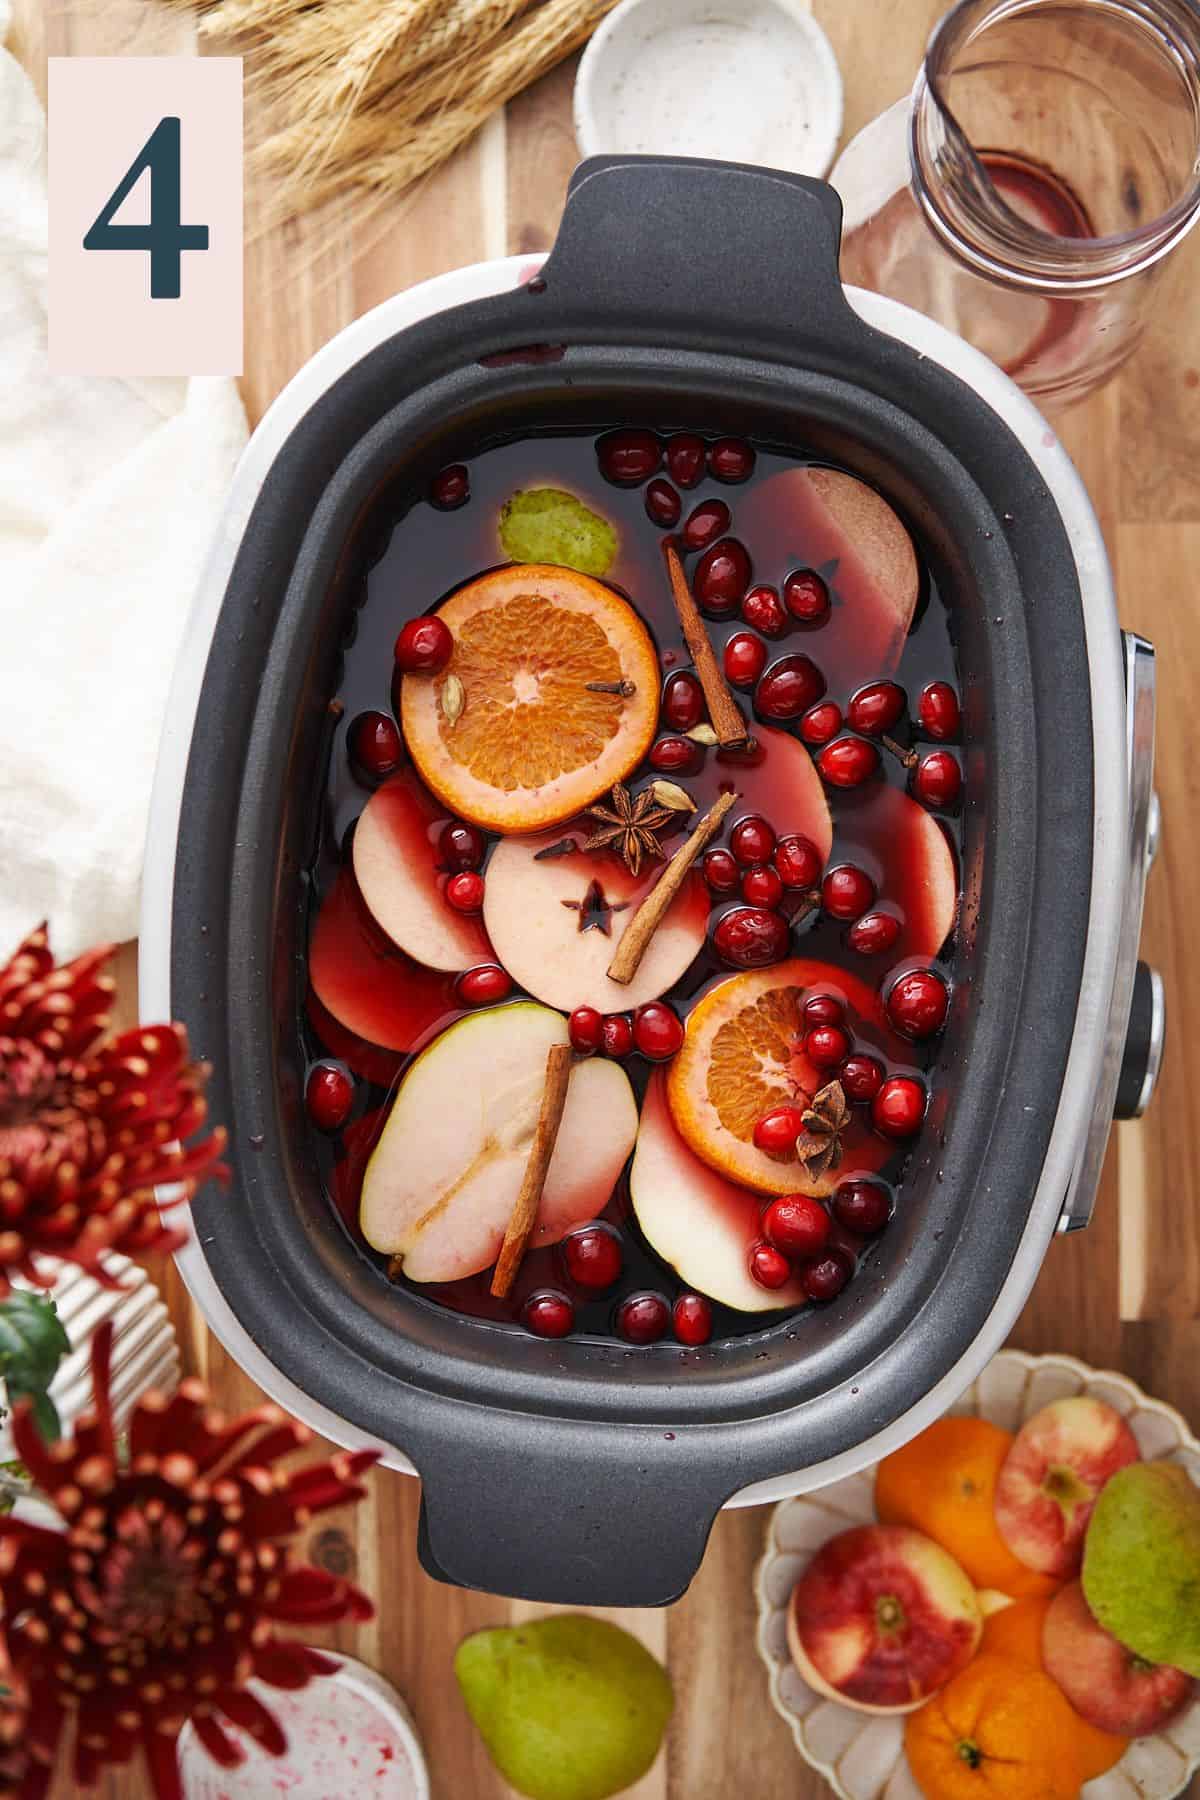 orange and apple rounds with pears, cranberries, cinnamon sticks, and other whole spices in a slow cooker with red wine, surrounded by fruit on a wood table. 